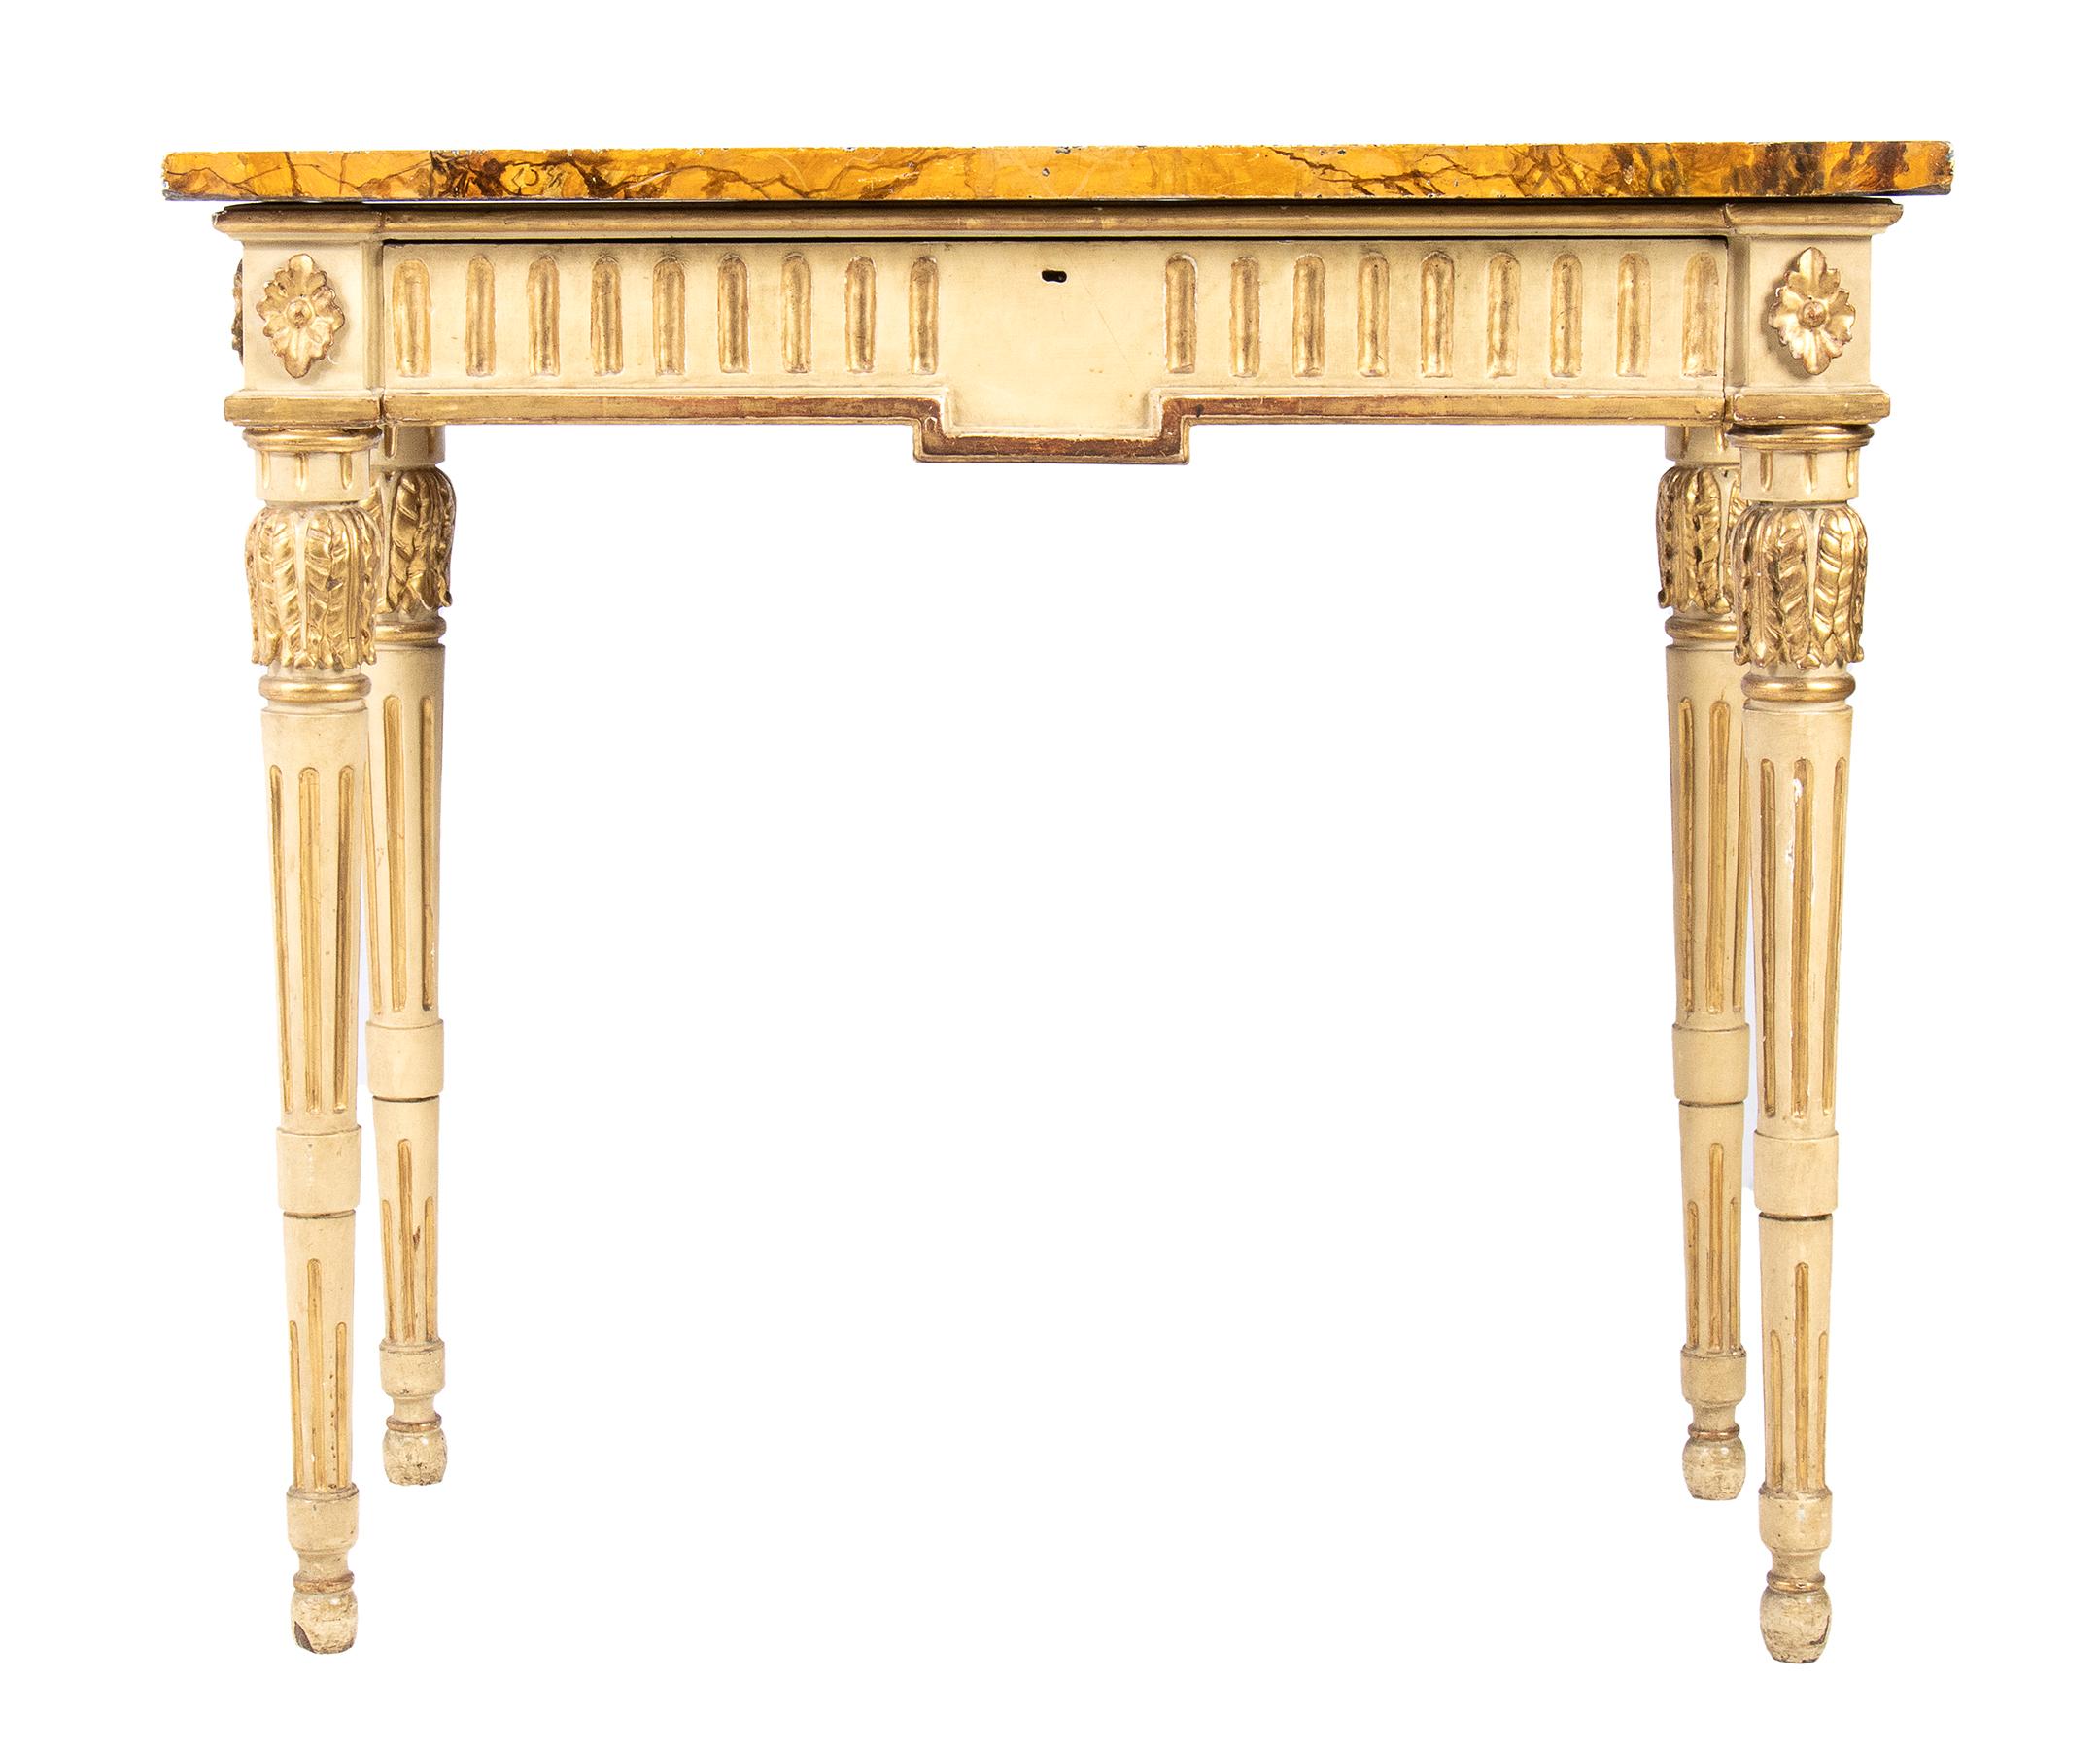 Lacquered and gilded console table - Venice, 18th century
A white and gold leaf, carved over the entire exposed structure, the front and sides decorated with laurel leaf festoons. The four truncated-cone legs are fluted and adorned at both top and